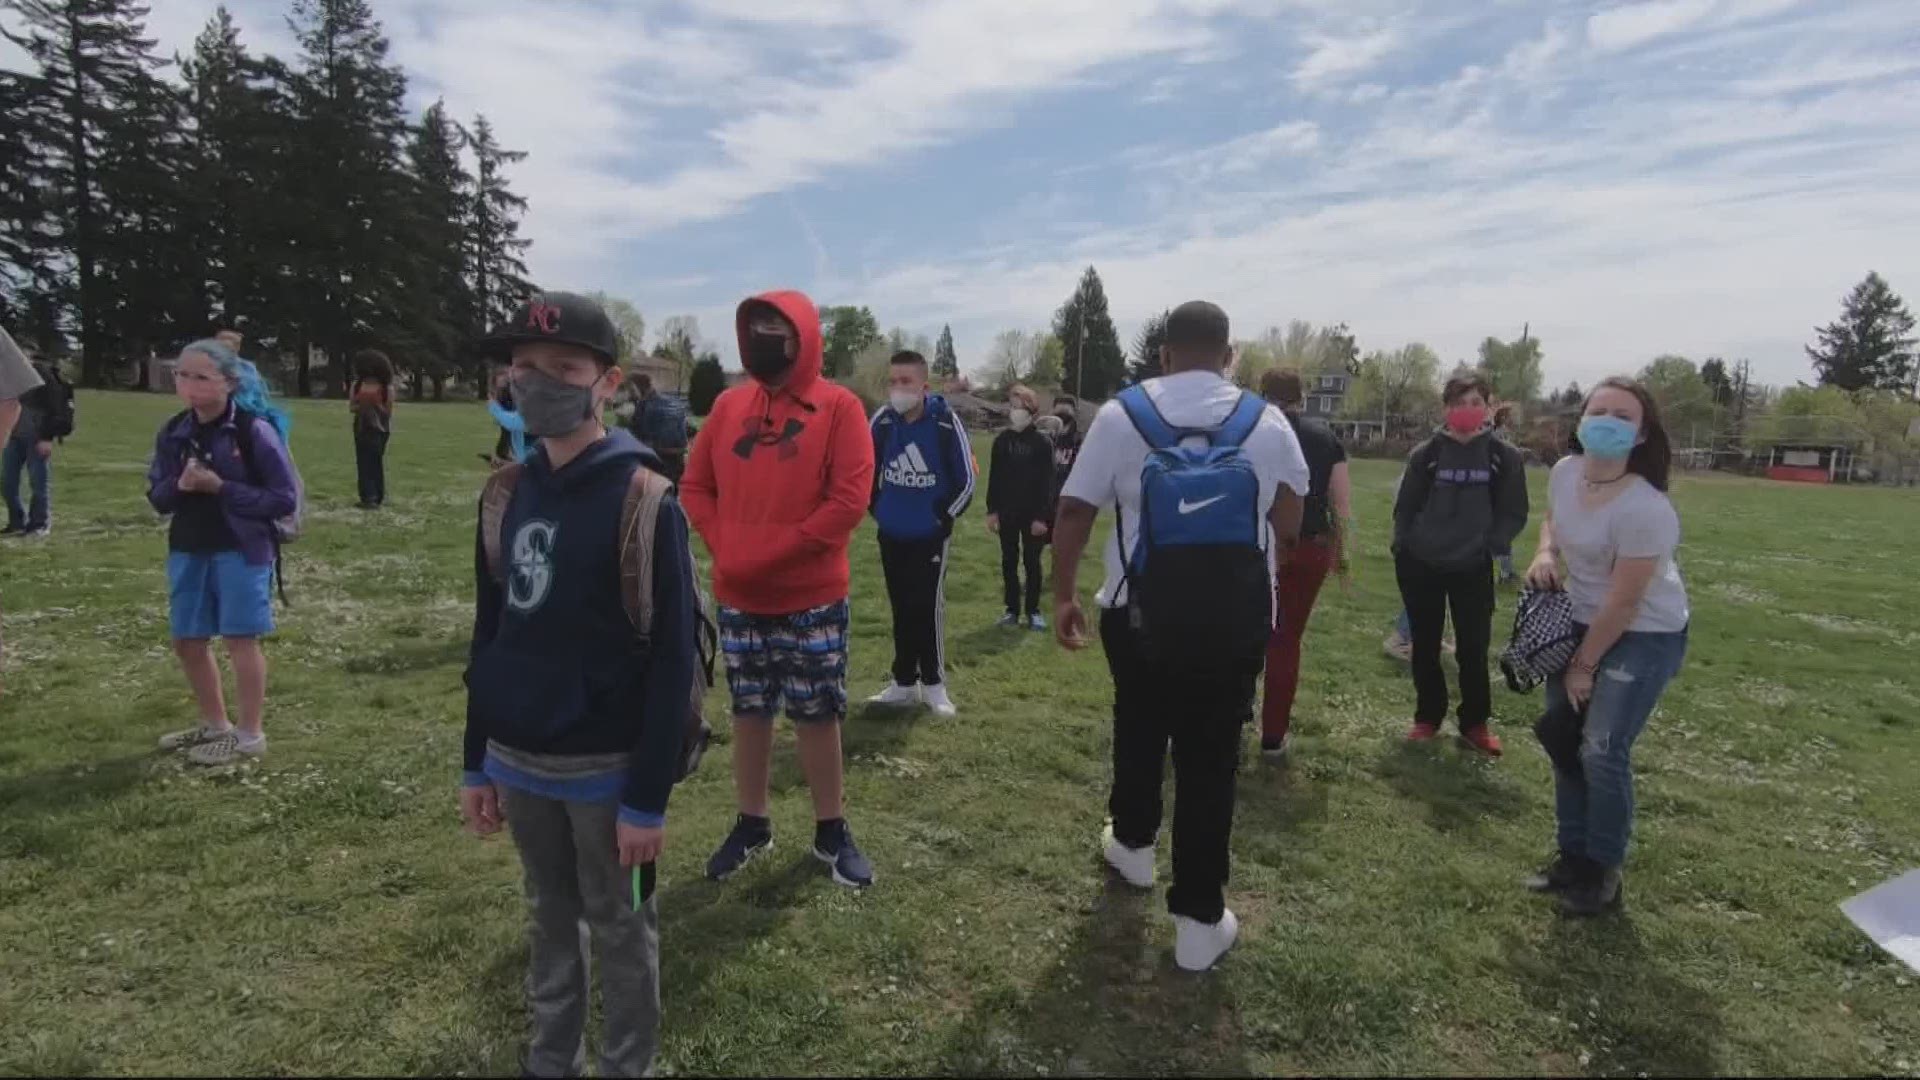 This week, many of Oregon’s older students stepped into a school building for the first time in more than a year. Christine Pitawanich spoke with teens about it.